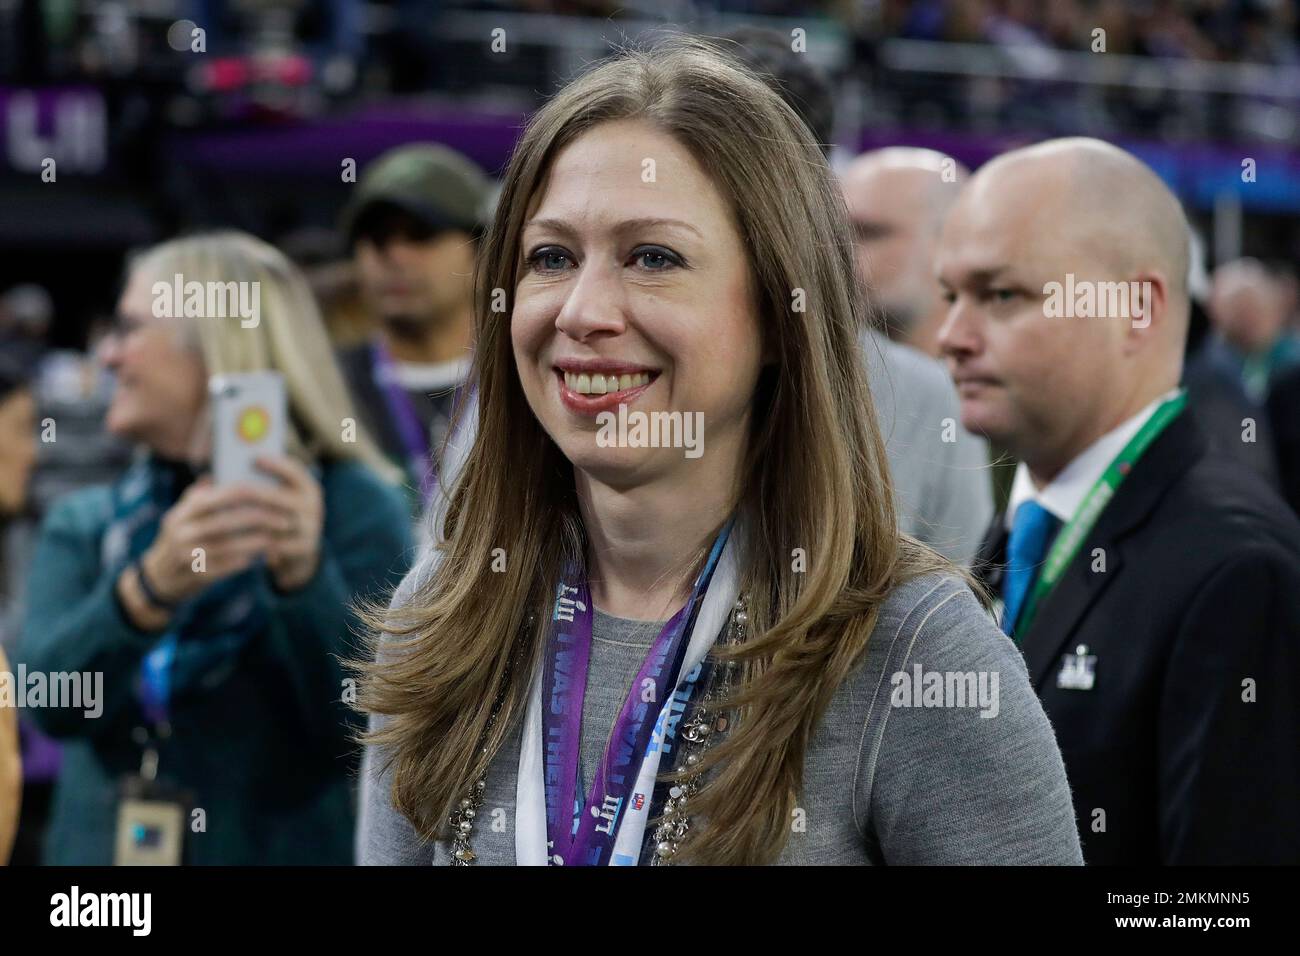 FILE - In this Feb. 4, 2018, file photo, Chelsea Clinton is seen before the  NFL Super Bowl 52 football game between the Philadelphia Eagles and the New  England Patriots in Minneapolis.